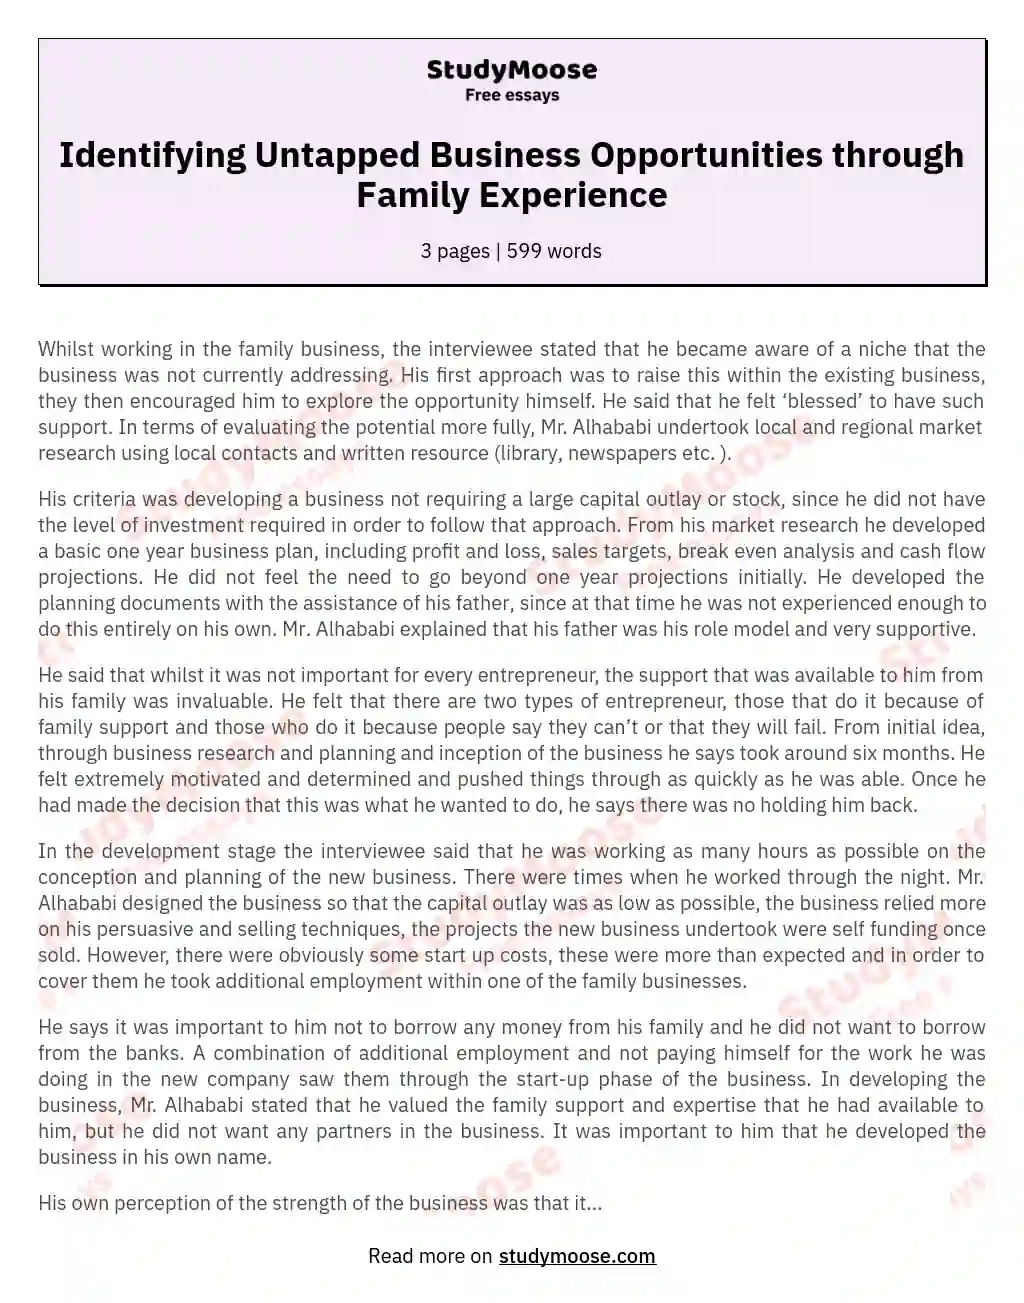 Identifying Untapped Business Opportunities through Family Experience essay